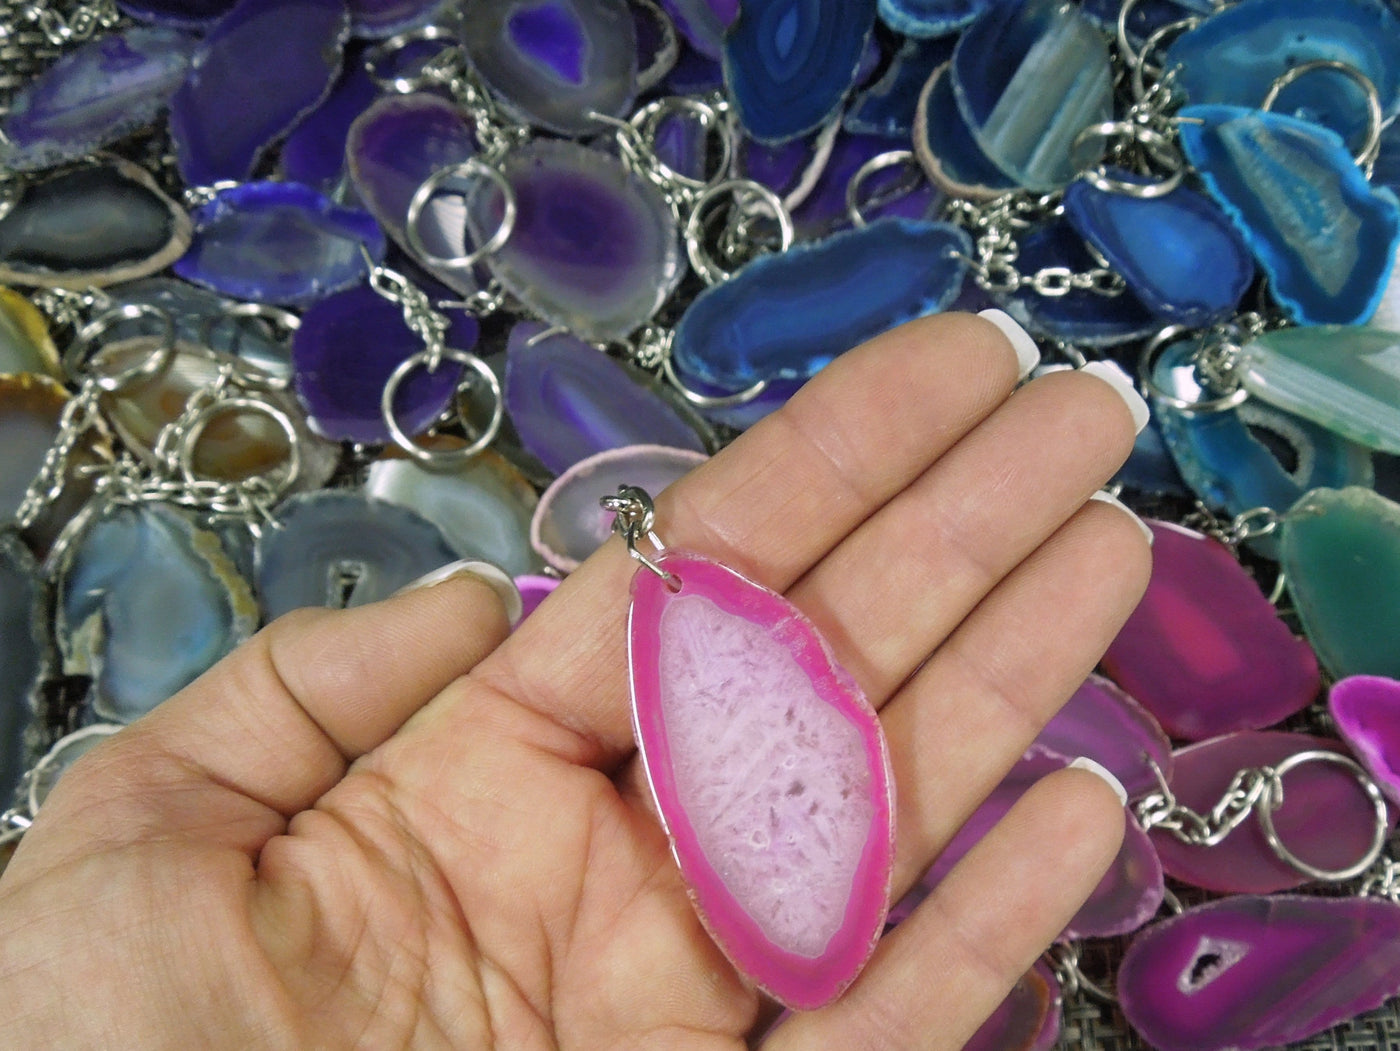 One pink agate keychain in a hand. Multiple agate keychains in the background.